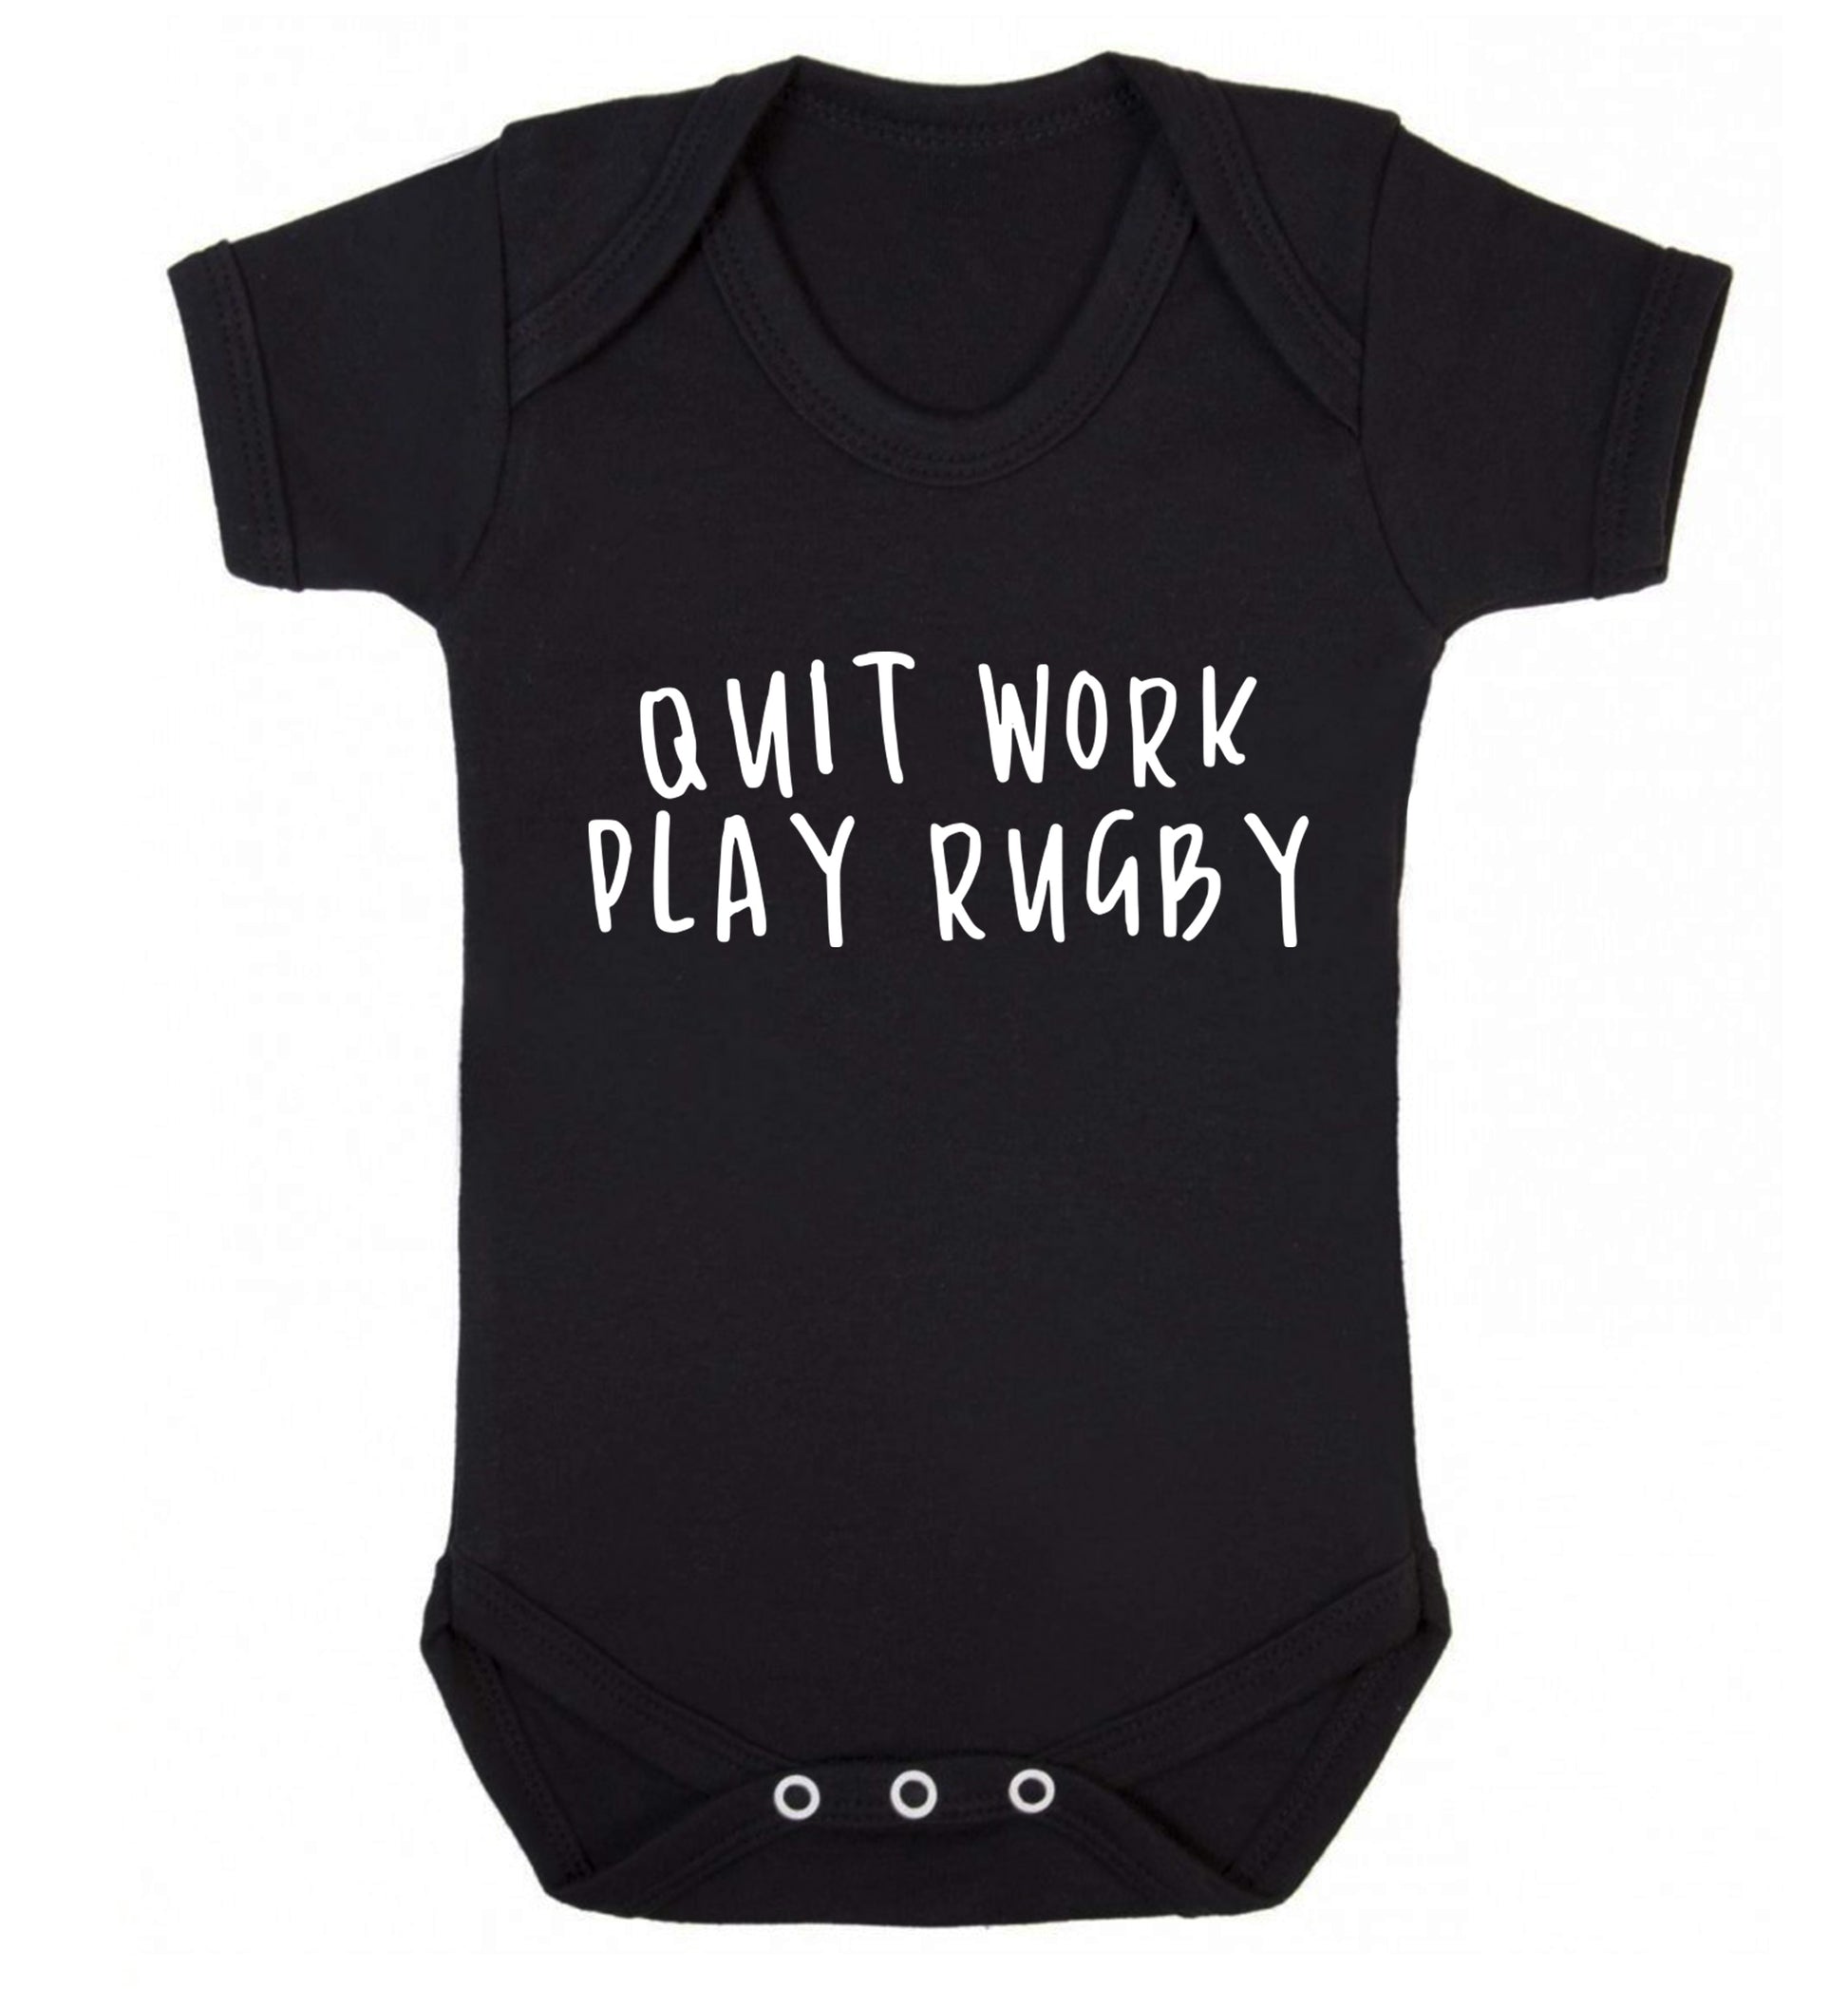 Quit work play rugby Baby Vest black 18-24 months